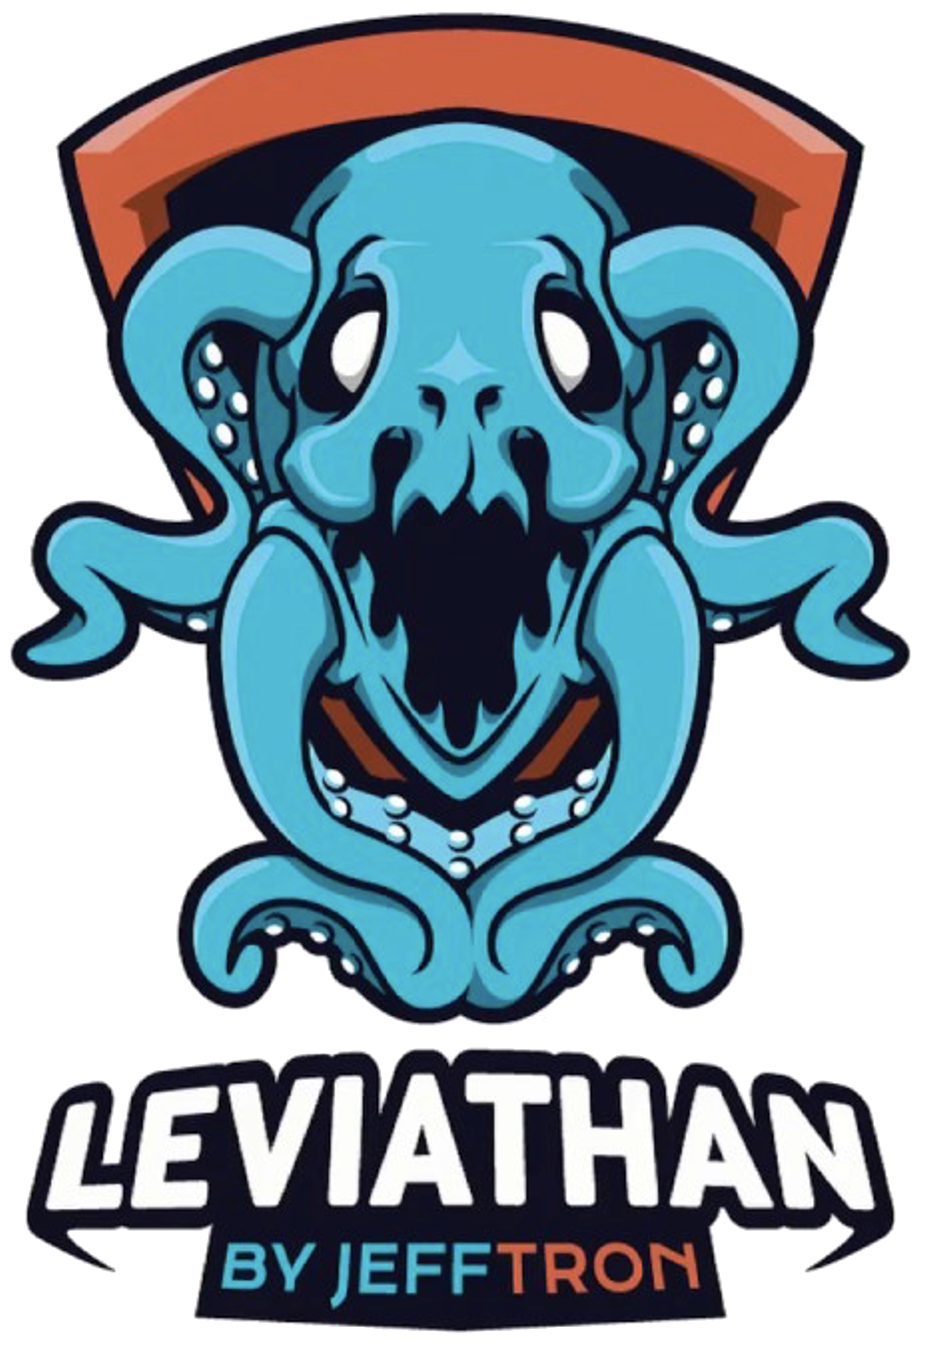 Introducing the JeffTron Leviathan for the ASG CZ Scorpion Evo!